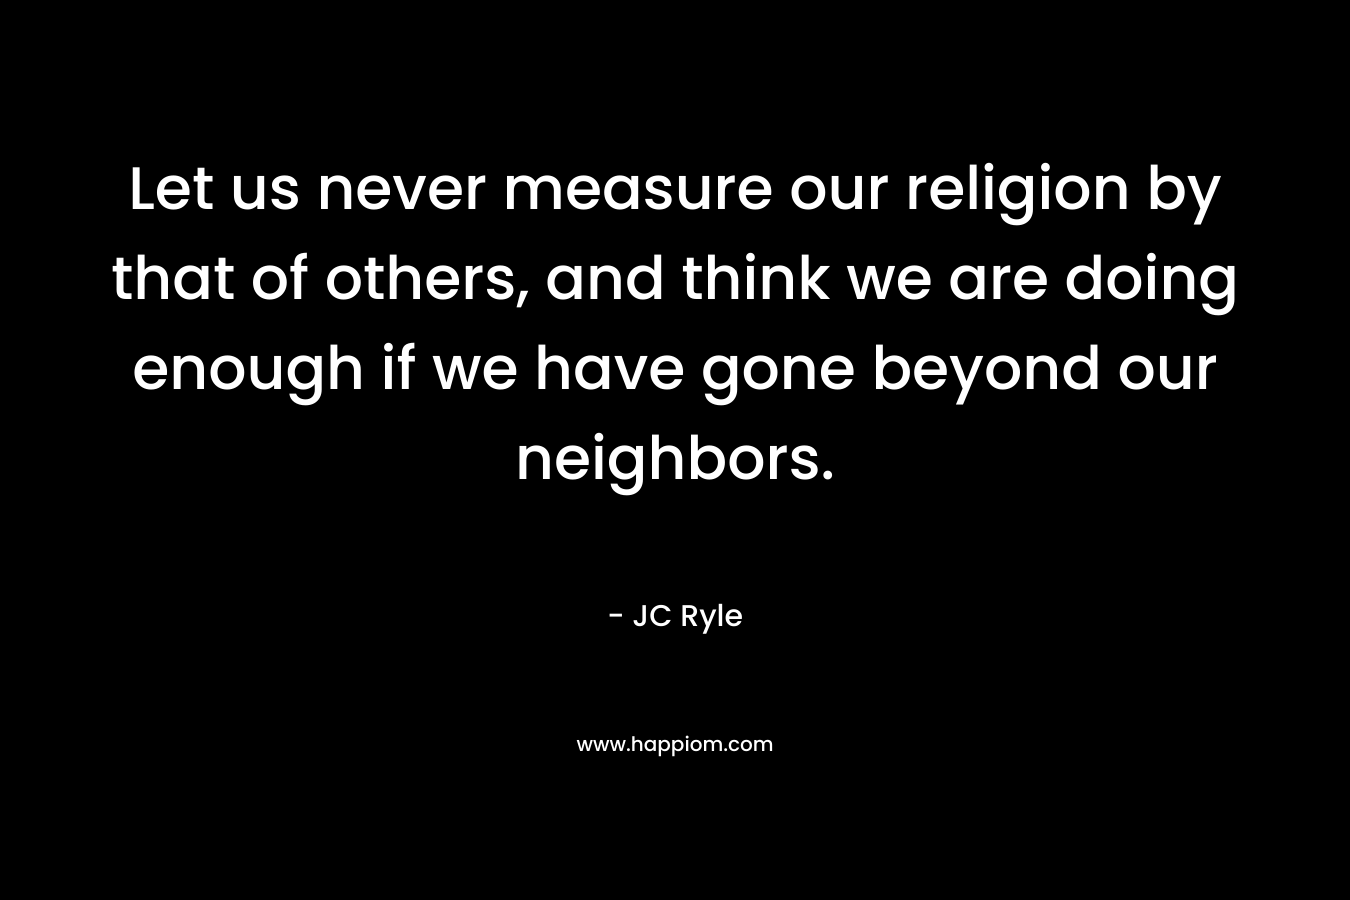 Let us never measure our religion by that of others, and think we are doing enough if we have gone beyond our neighbors. – JC Ryle